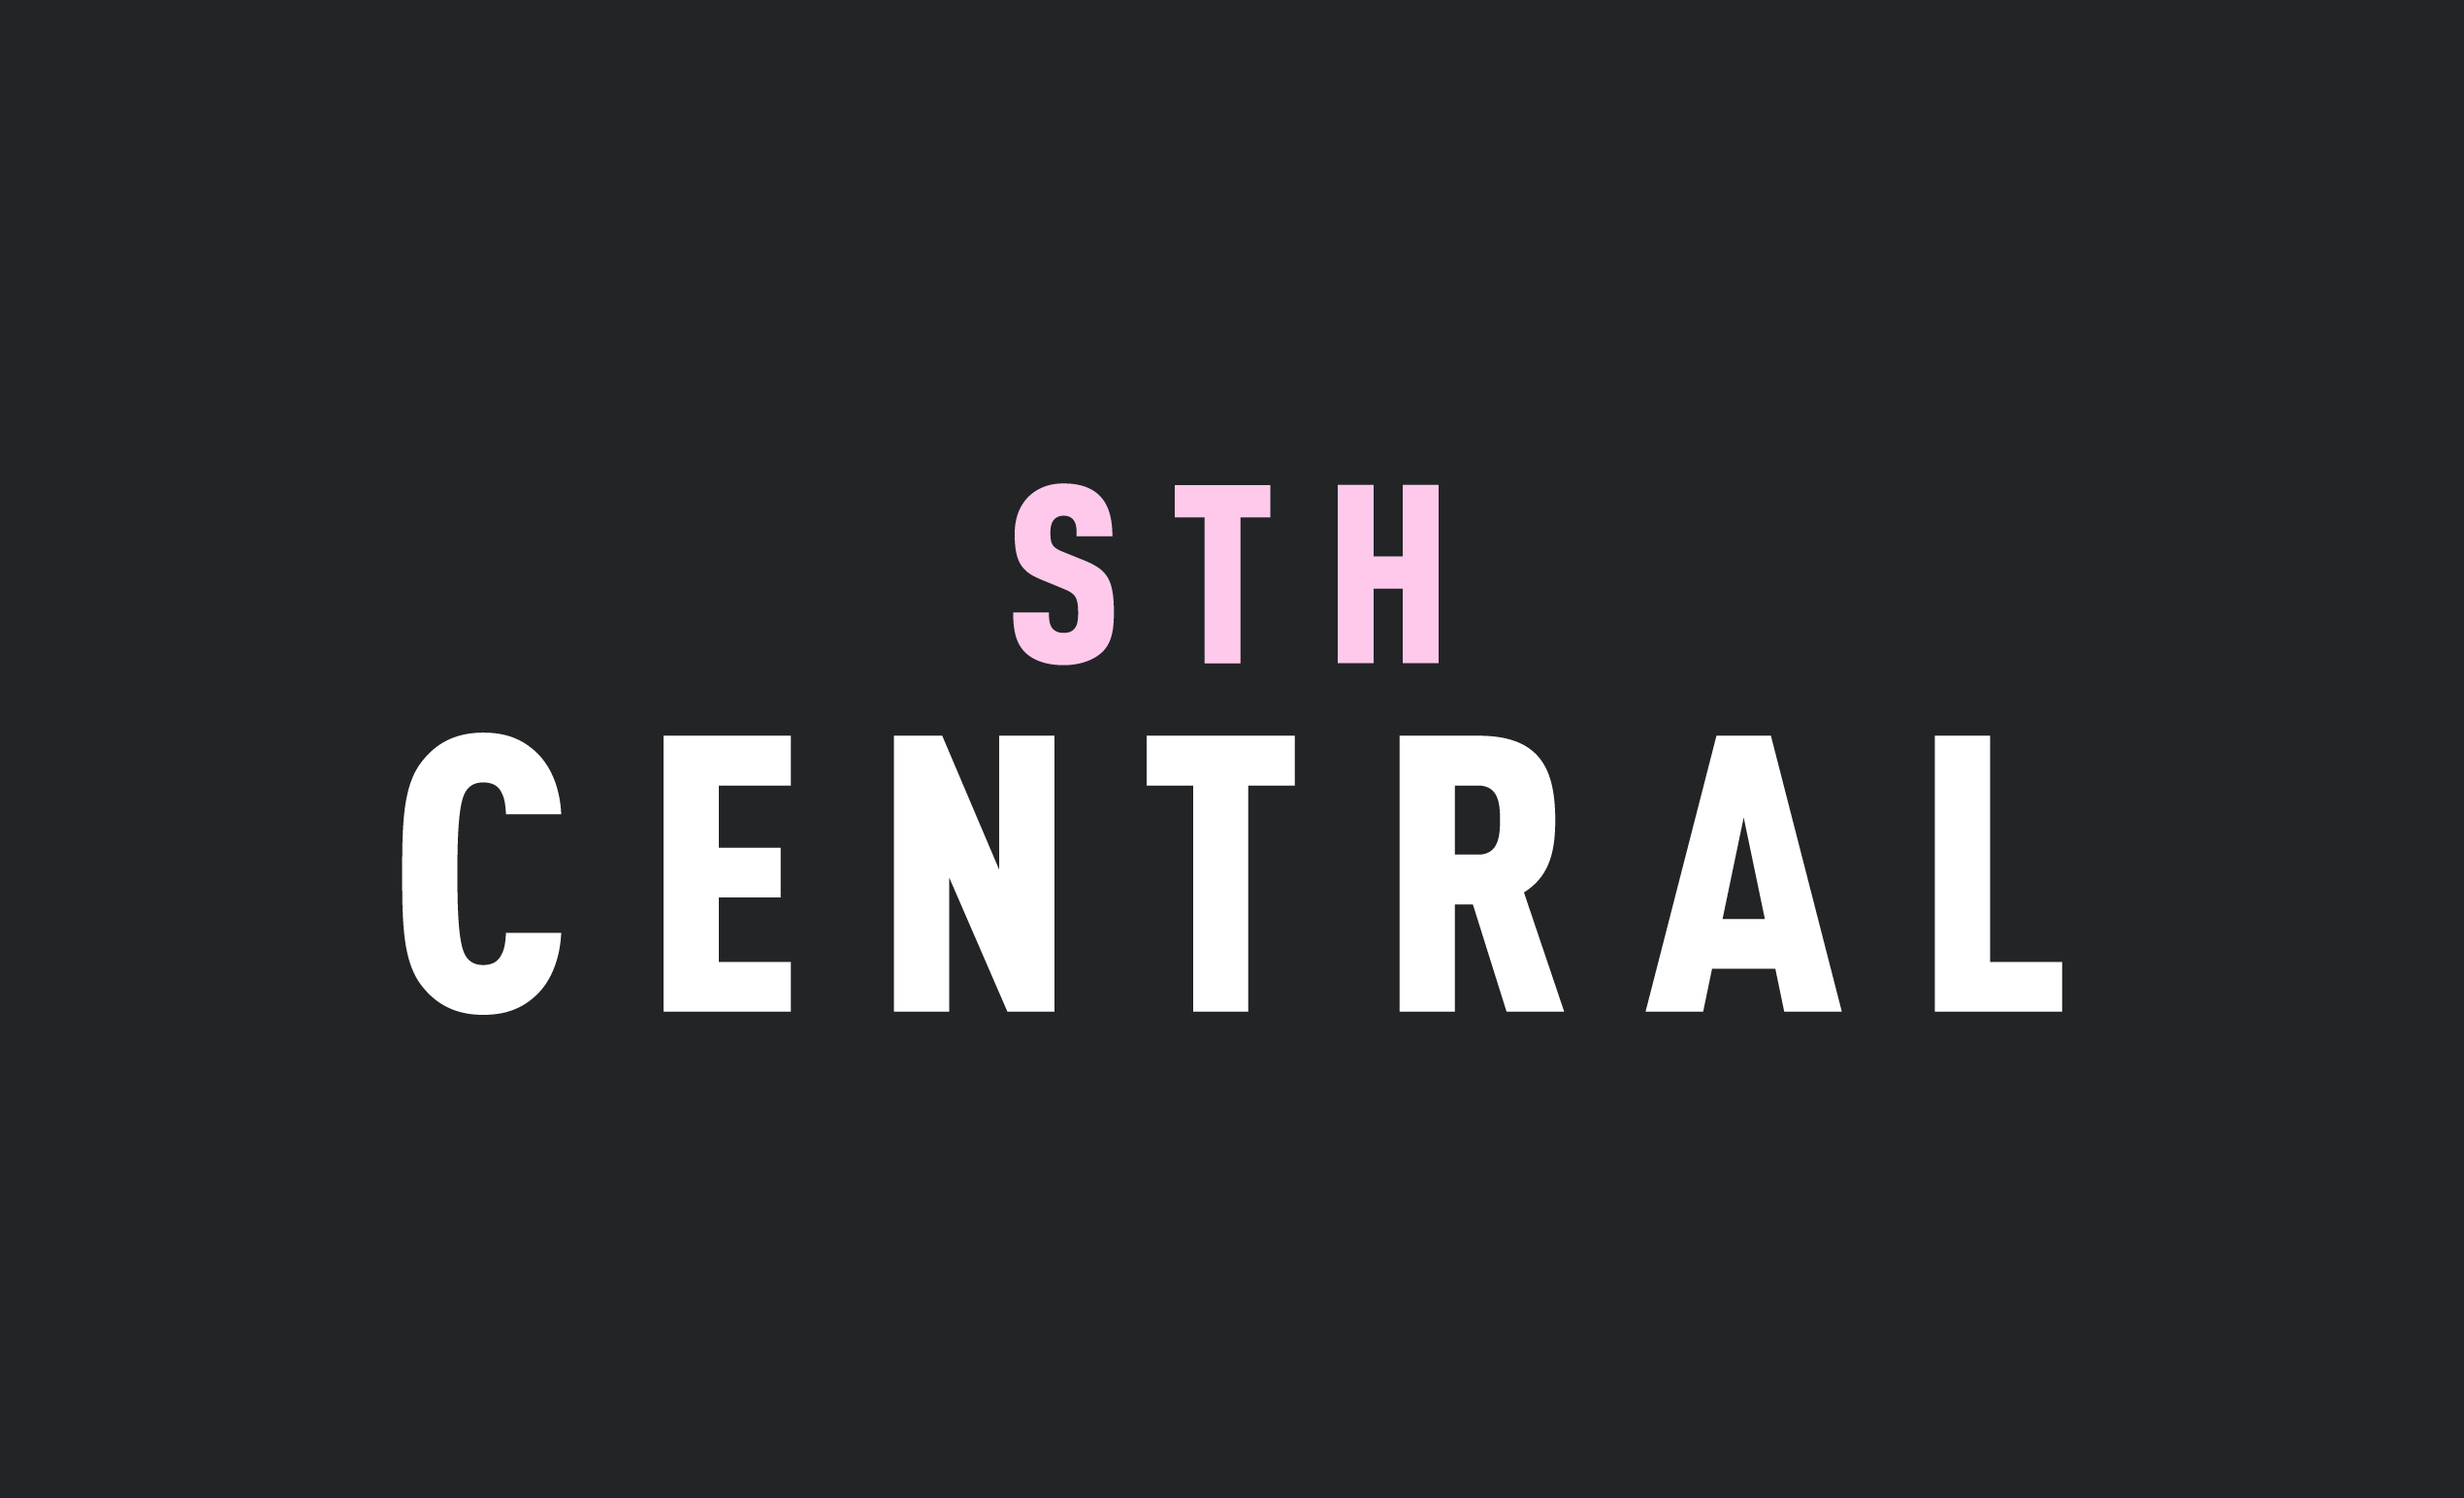 Sth Central